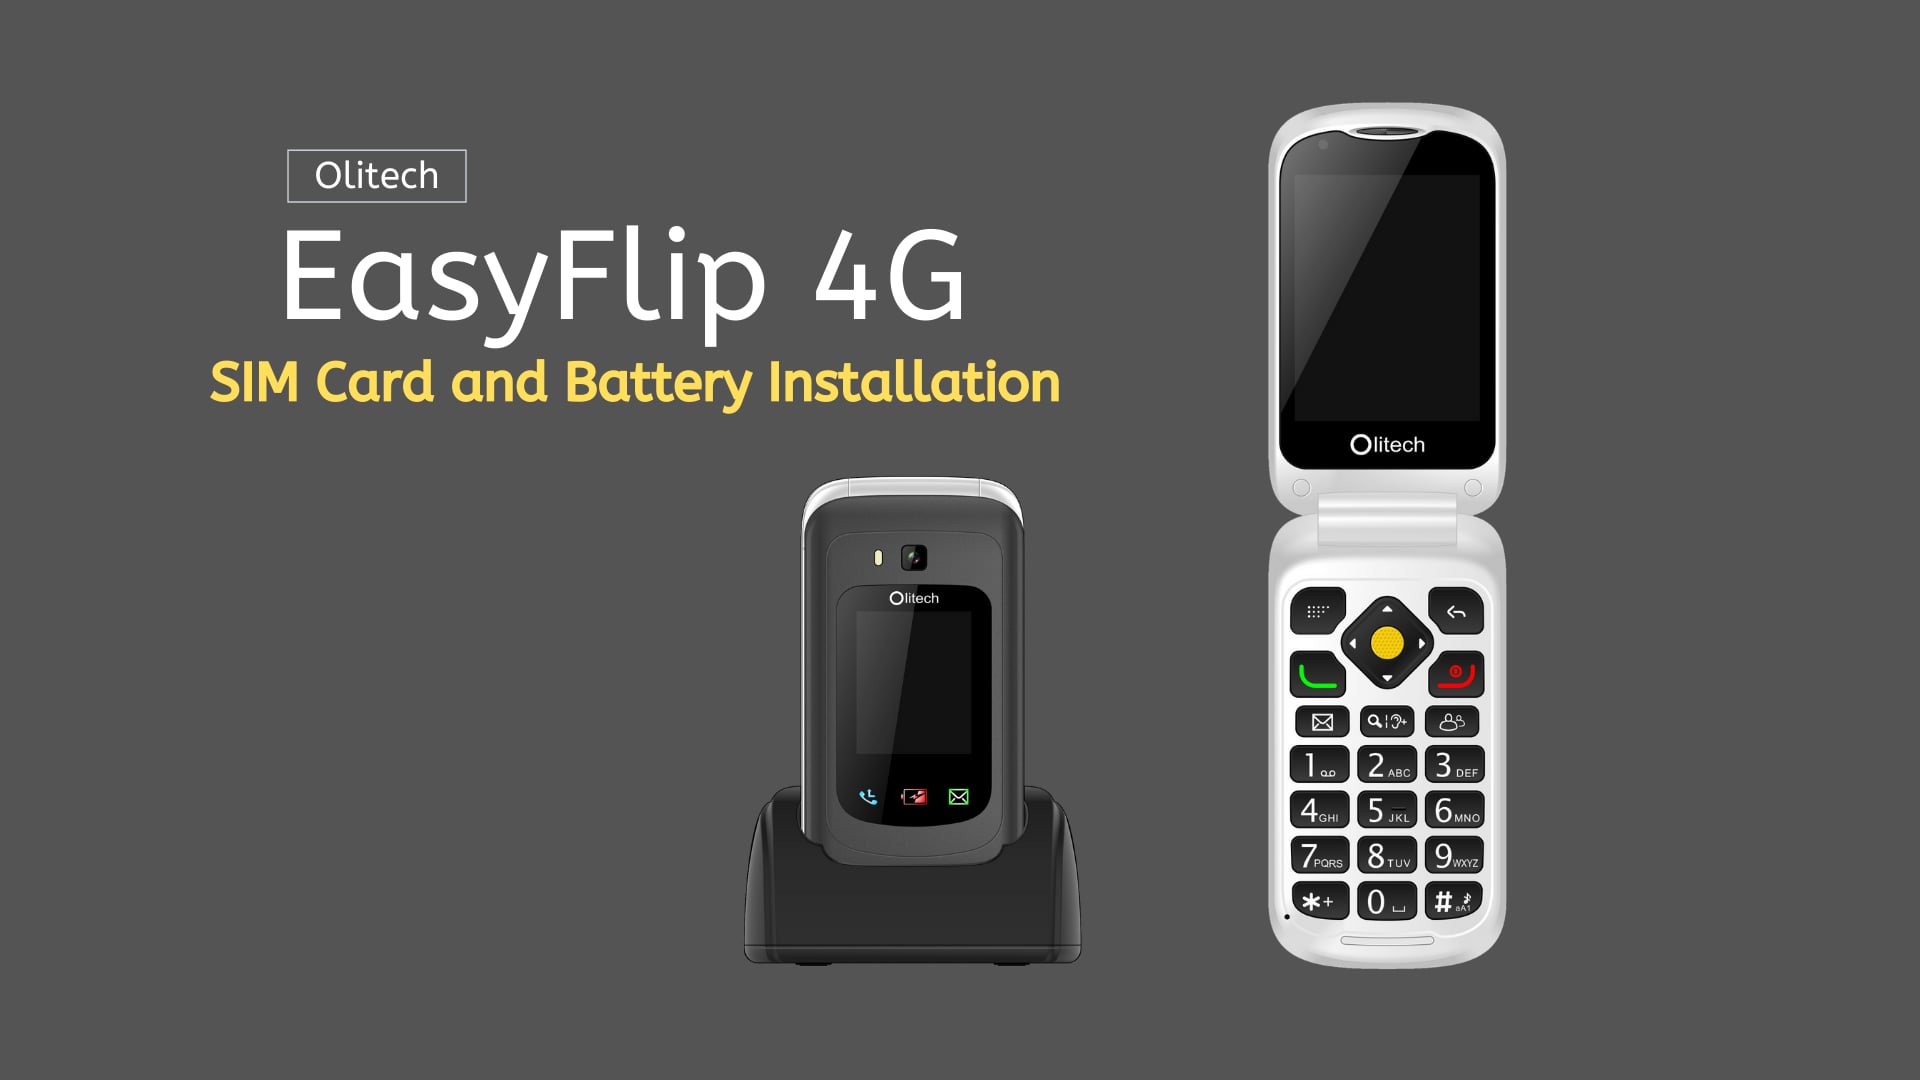 Olitech EasyFlip 4G - SIM Card and Battery Insertion Video